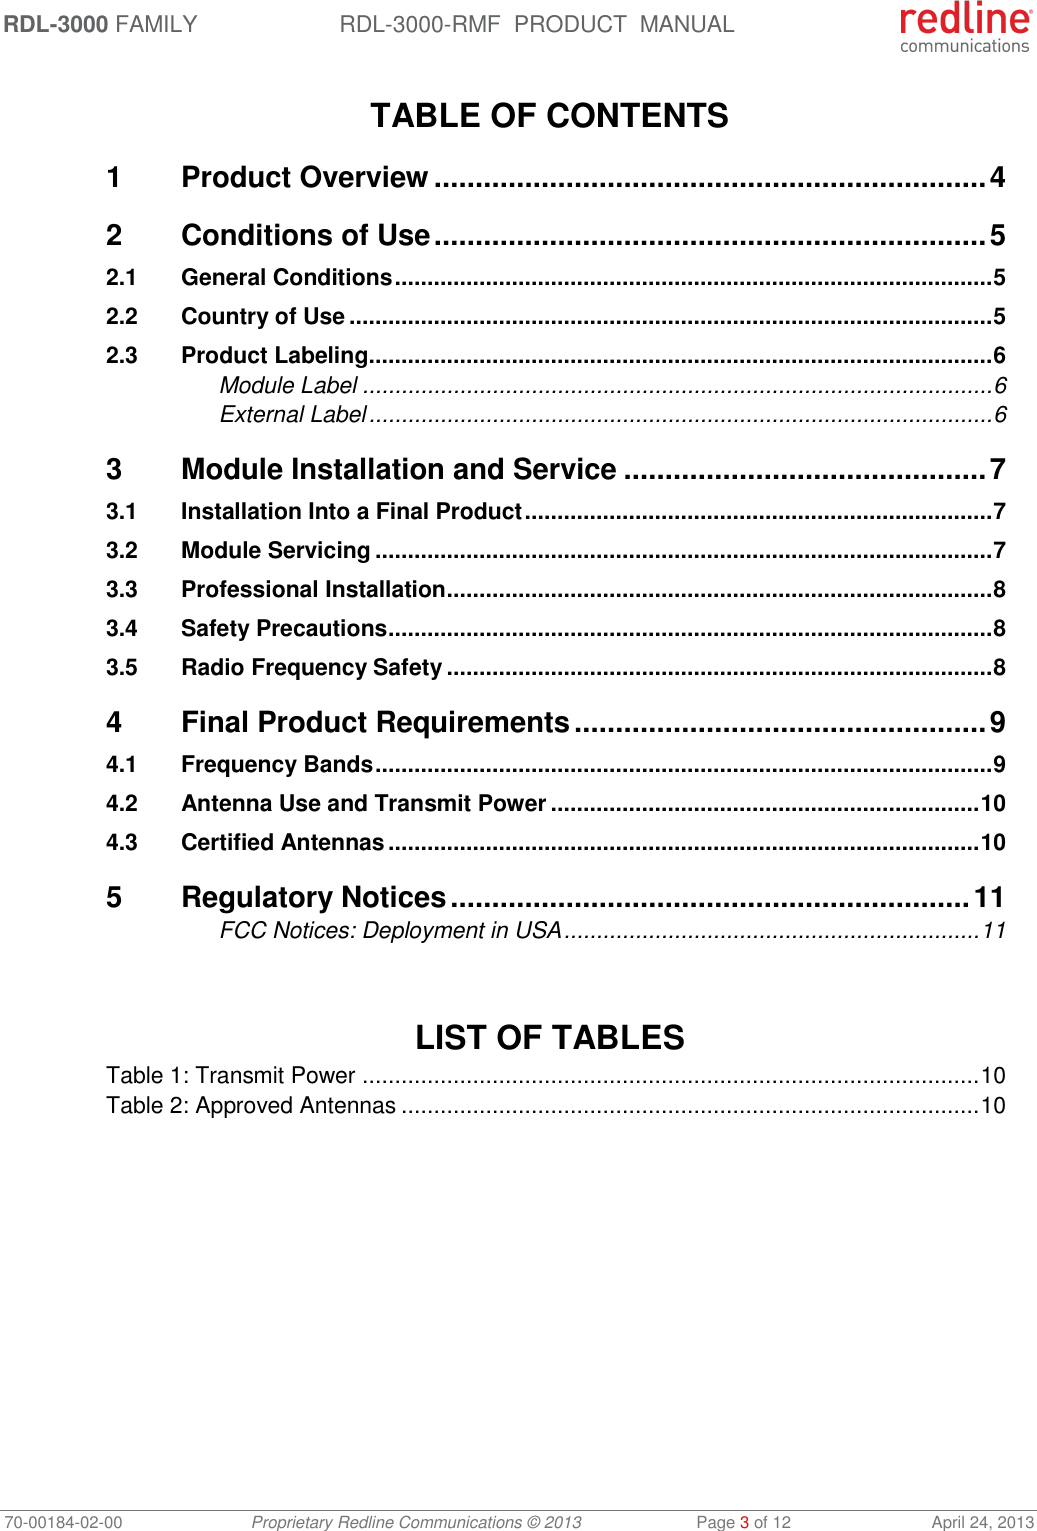 RDL-3000 FAMILY RDL-3000-RMF  PRODUCT  MANUAL 70-00184-02-00 Proprietary Redline Communications © 2013  Page 3 of 12  April 24, 2013  TABLE OF CONTENTS 1 Product Overview ................................................................... 4 2 Conditions of Use ................................................................... 5 2.1 General Conditions ............................................................................................ 5 2.2 Country of Use ................................................................................................... 5 2.3 Product Labeling ................................................................................................ 6 Module Label ................................................................................................. 6 External Label ................................................................................................ 6 3 Module Installation and Service ............................................ 7 3.1 Installation Into a Final Product ........................................................................ 7 3.2 Module Servicing ............................................................................................... 7 3.3 Professional Installation .................................................................................... 8 3.4 Safety Precautions ............................................................................................. 8 3.5 Radio Frequency Safety .................................................................................... 8 4 Final Product Requirements .................................................. 9 4.1 Frequency Bands ............................................................................................... 9 4.2 Antenna Use and Transmit Power .................................................................. 10 4.3 Certified Antennas ........................................................................................... 10 5 Regulatory Notices ............................................................... 11 FCC Notices: Deployment in USA ................................................................ 11    LIST OF TABLES Table 1: Transmit Power ............................................................................................... 10 Table 2: Approved Antennas ......................................................................................... 10 